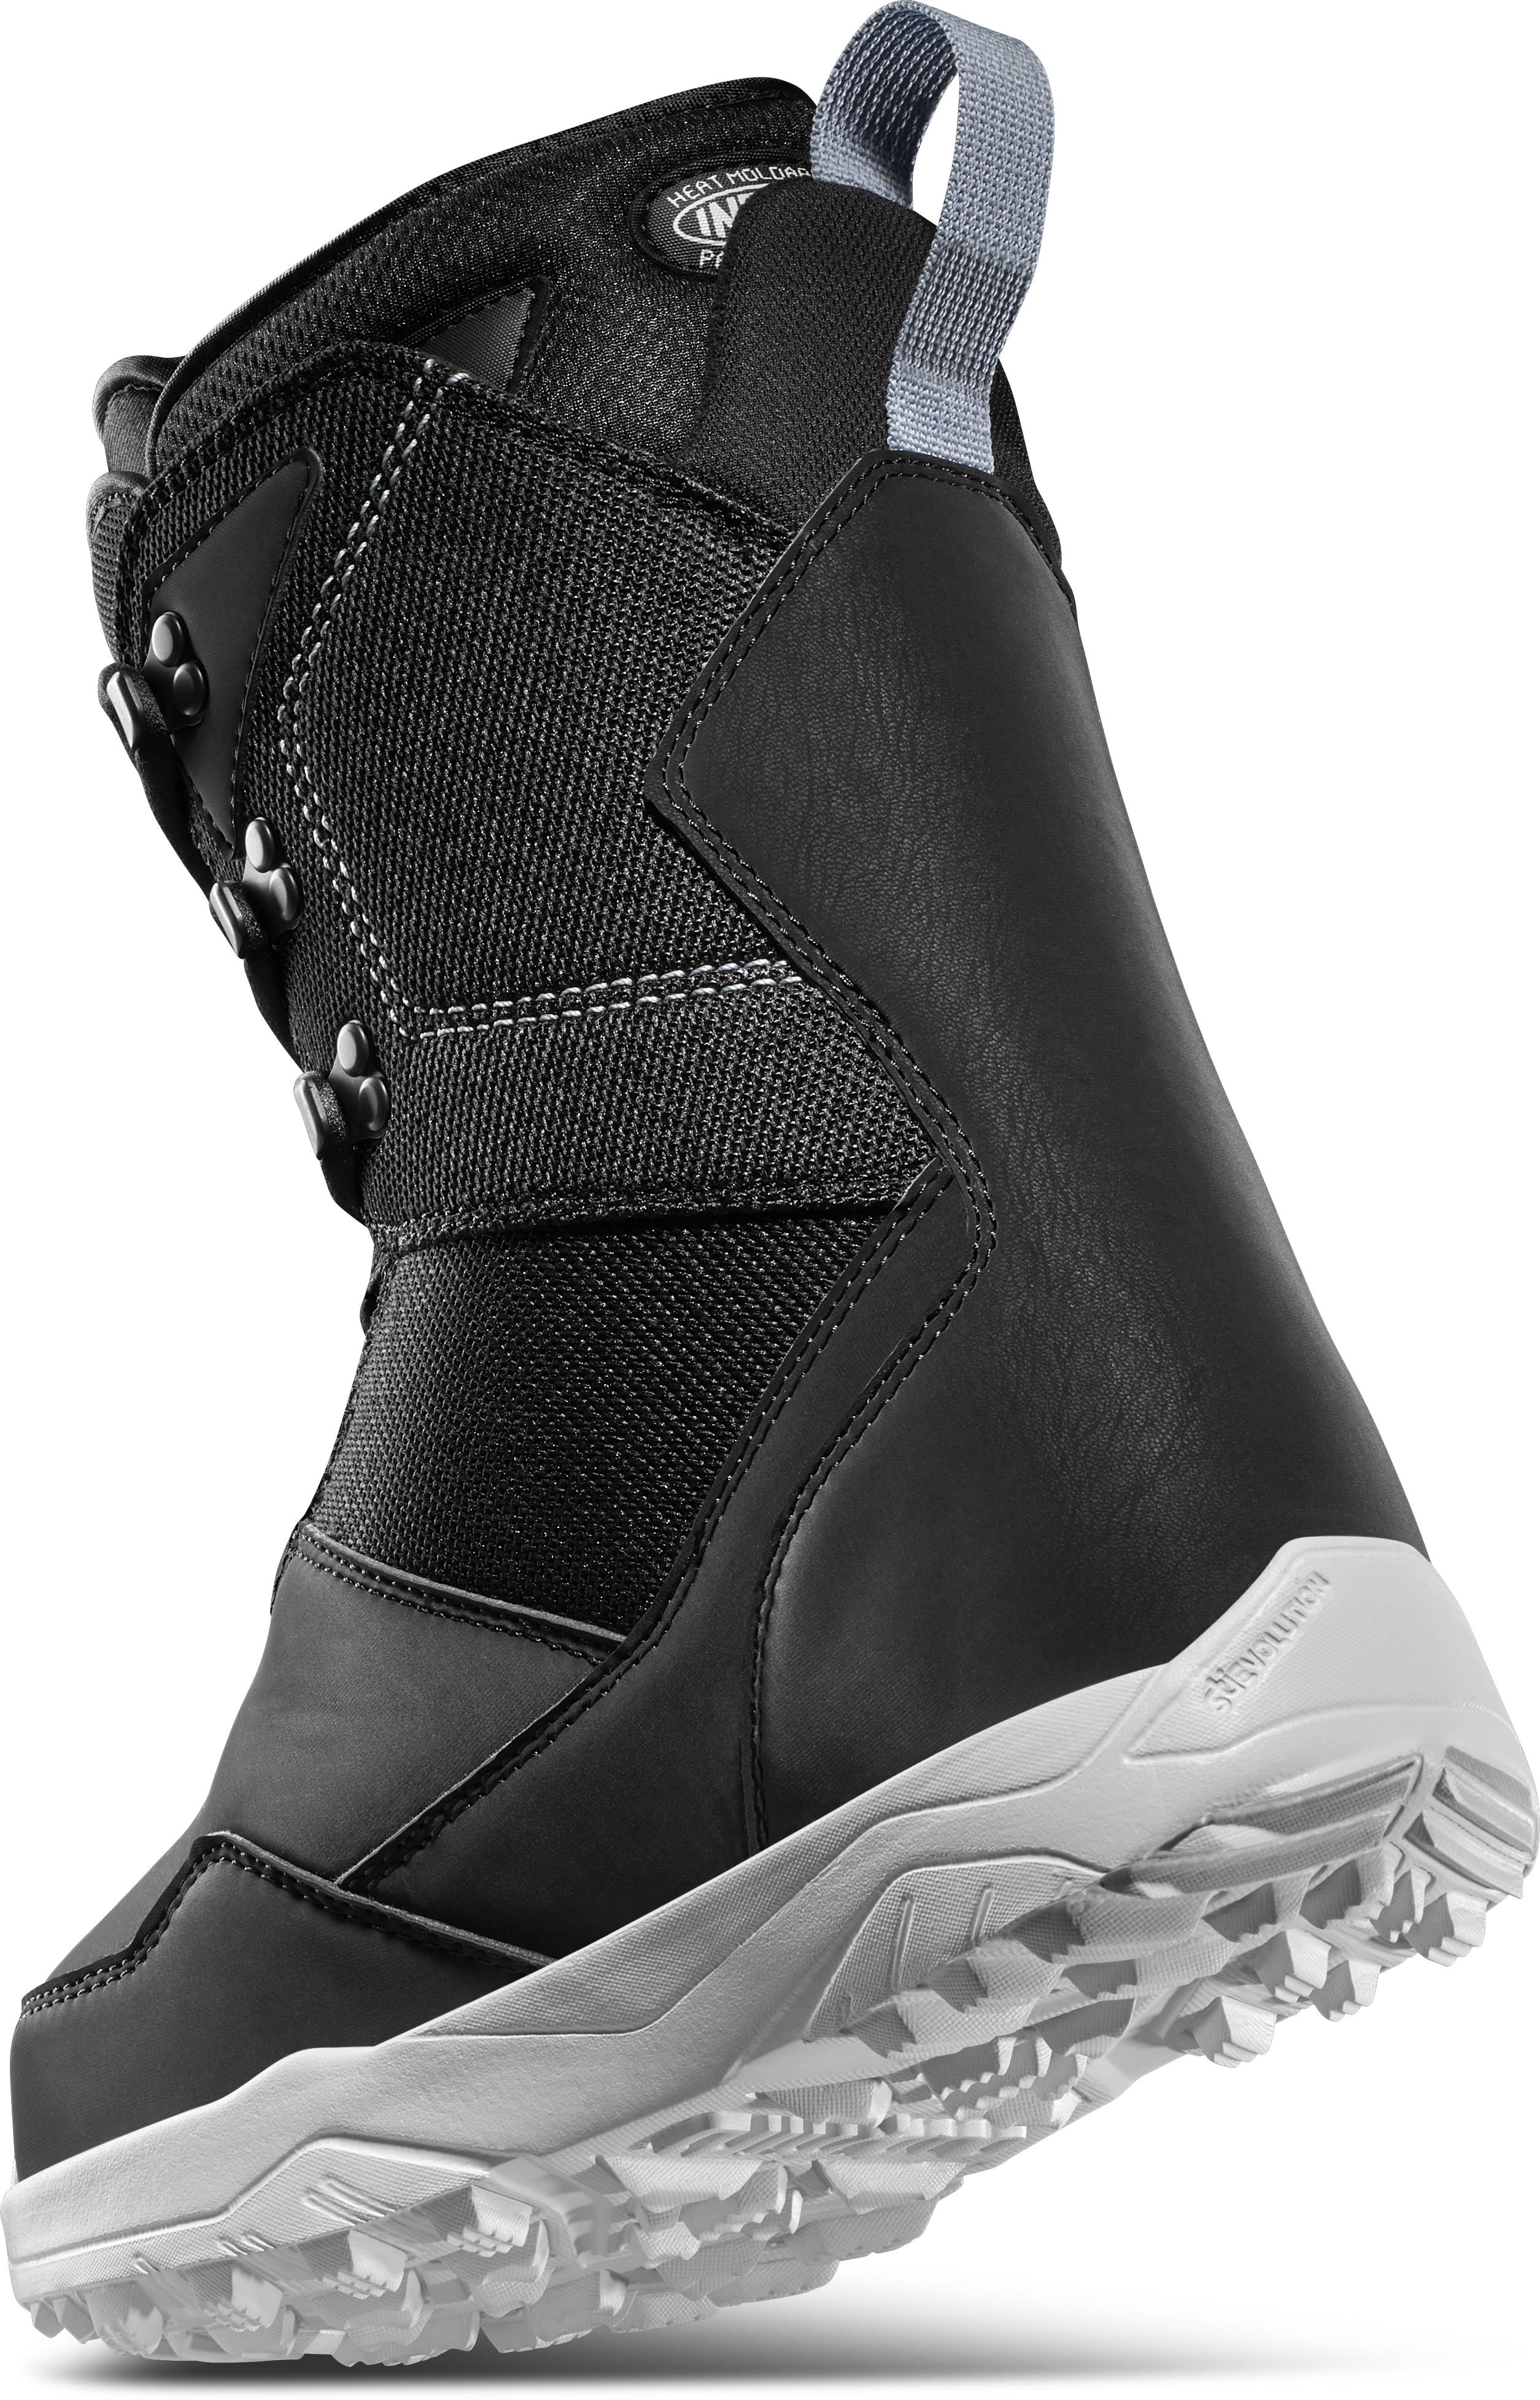 thirtytwo Shifty Women's Snowboard Boots